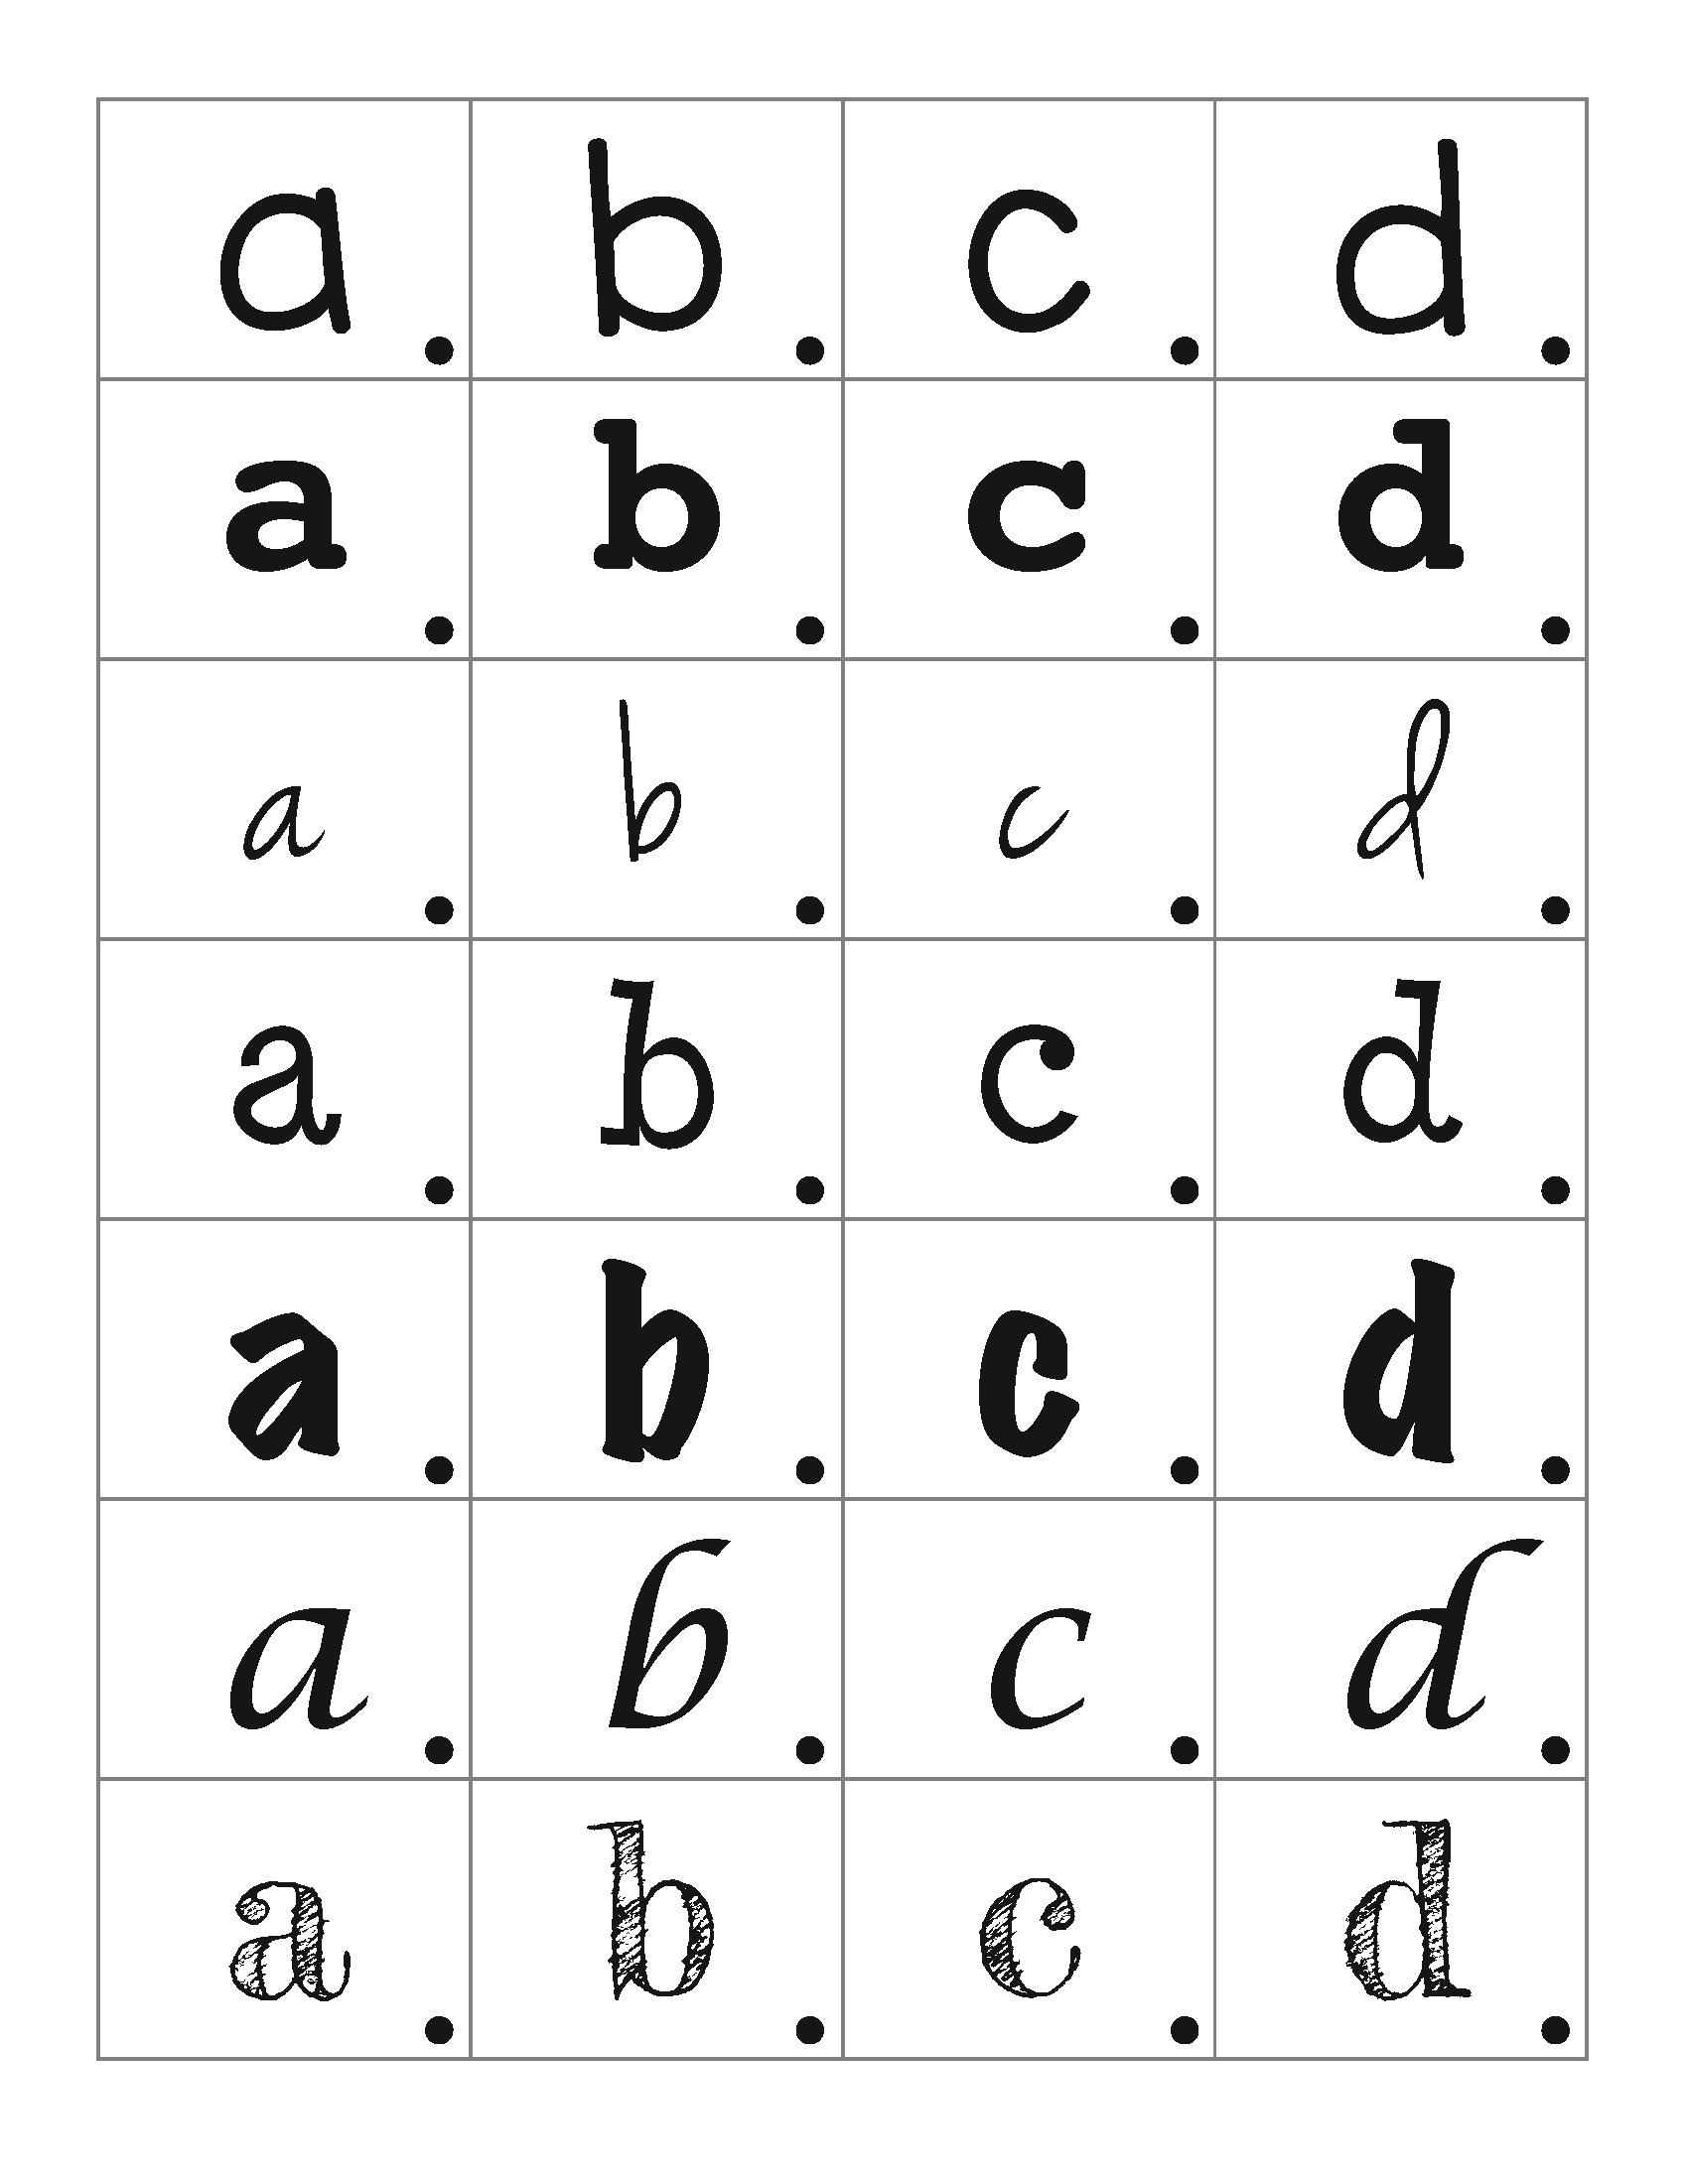 Funky Fonts Letter Sorting Activity With Free Printable {101 Ways - Printable Letters In Different Fonts